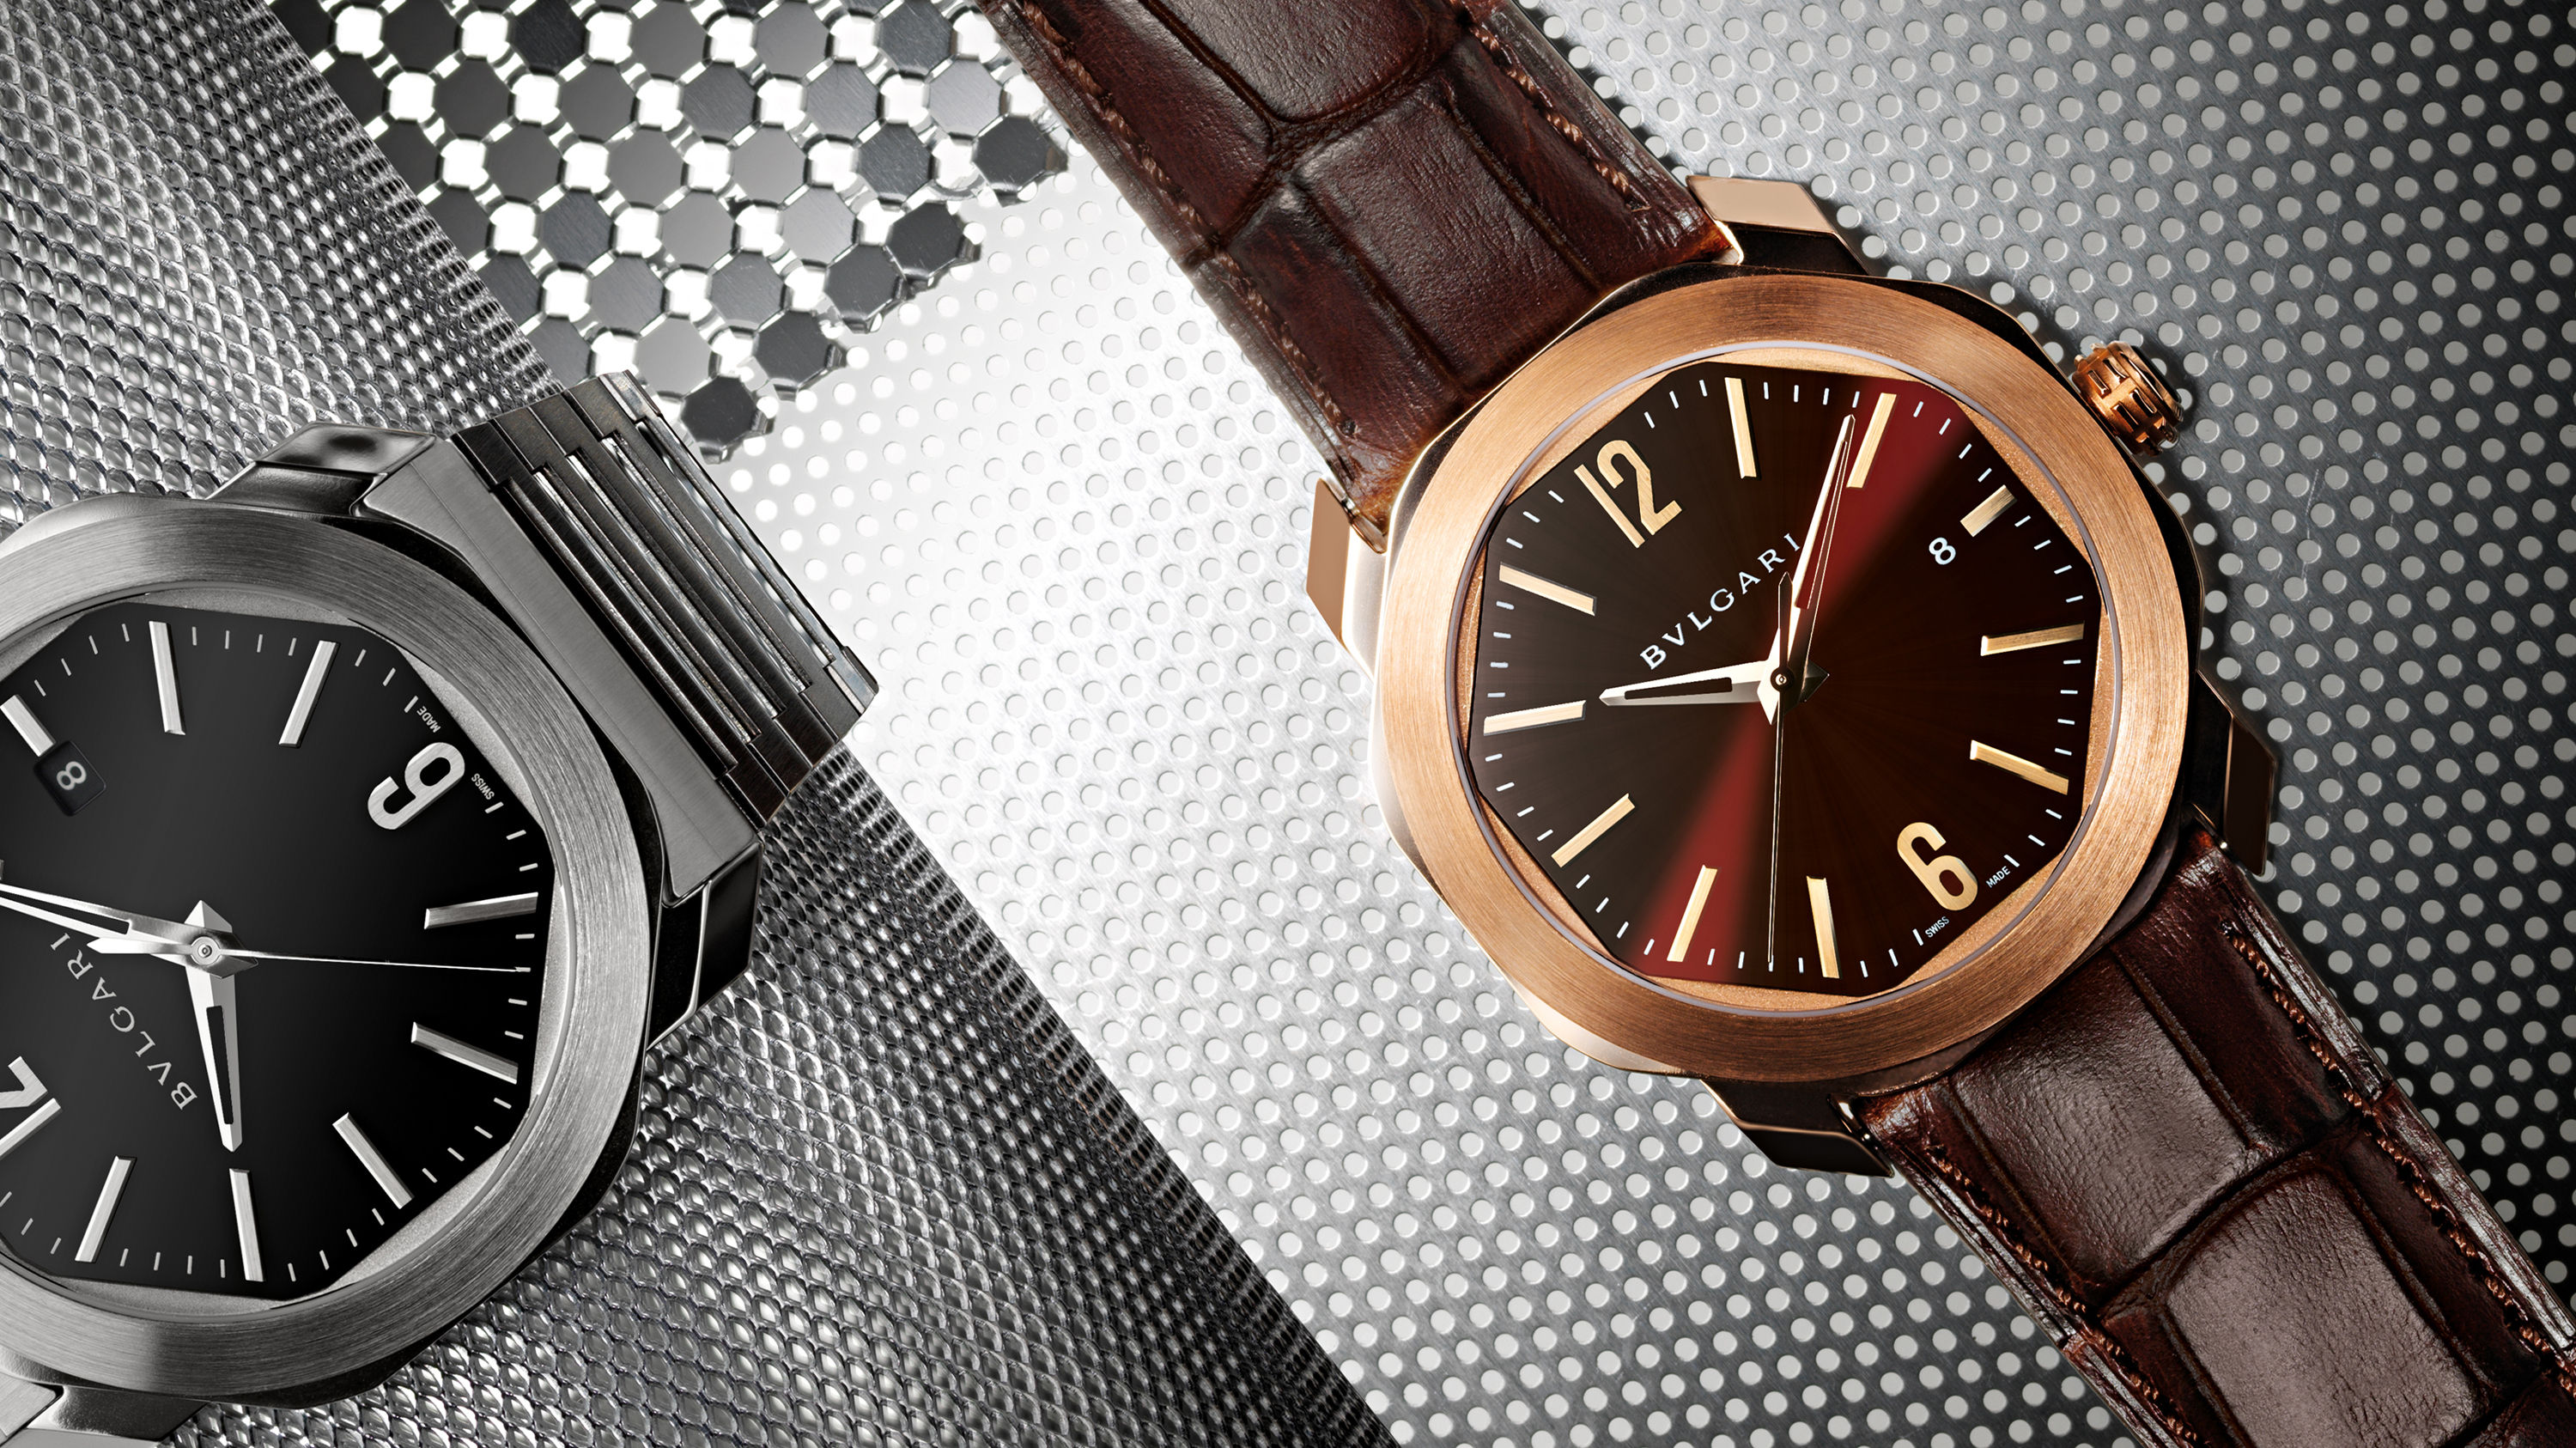 Bulgari introduces new Octo Roma watches ahead of Baselworld